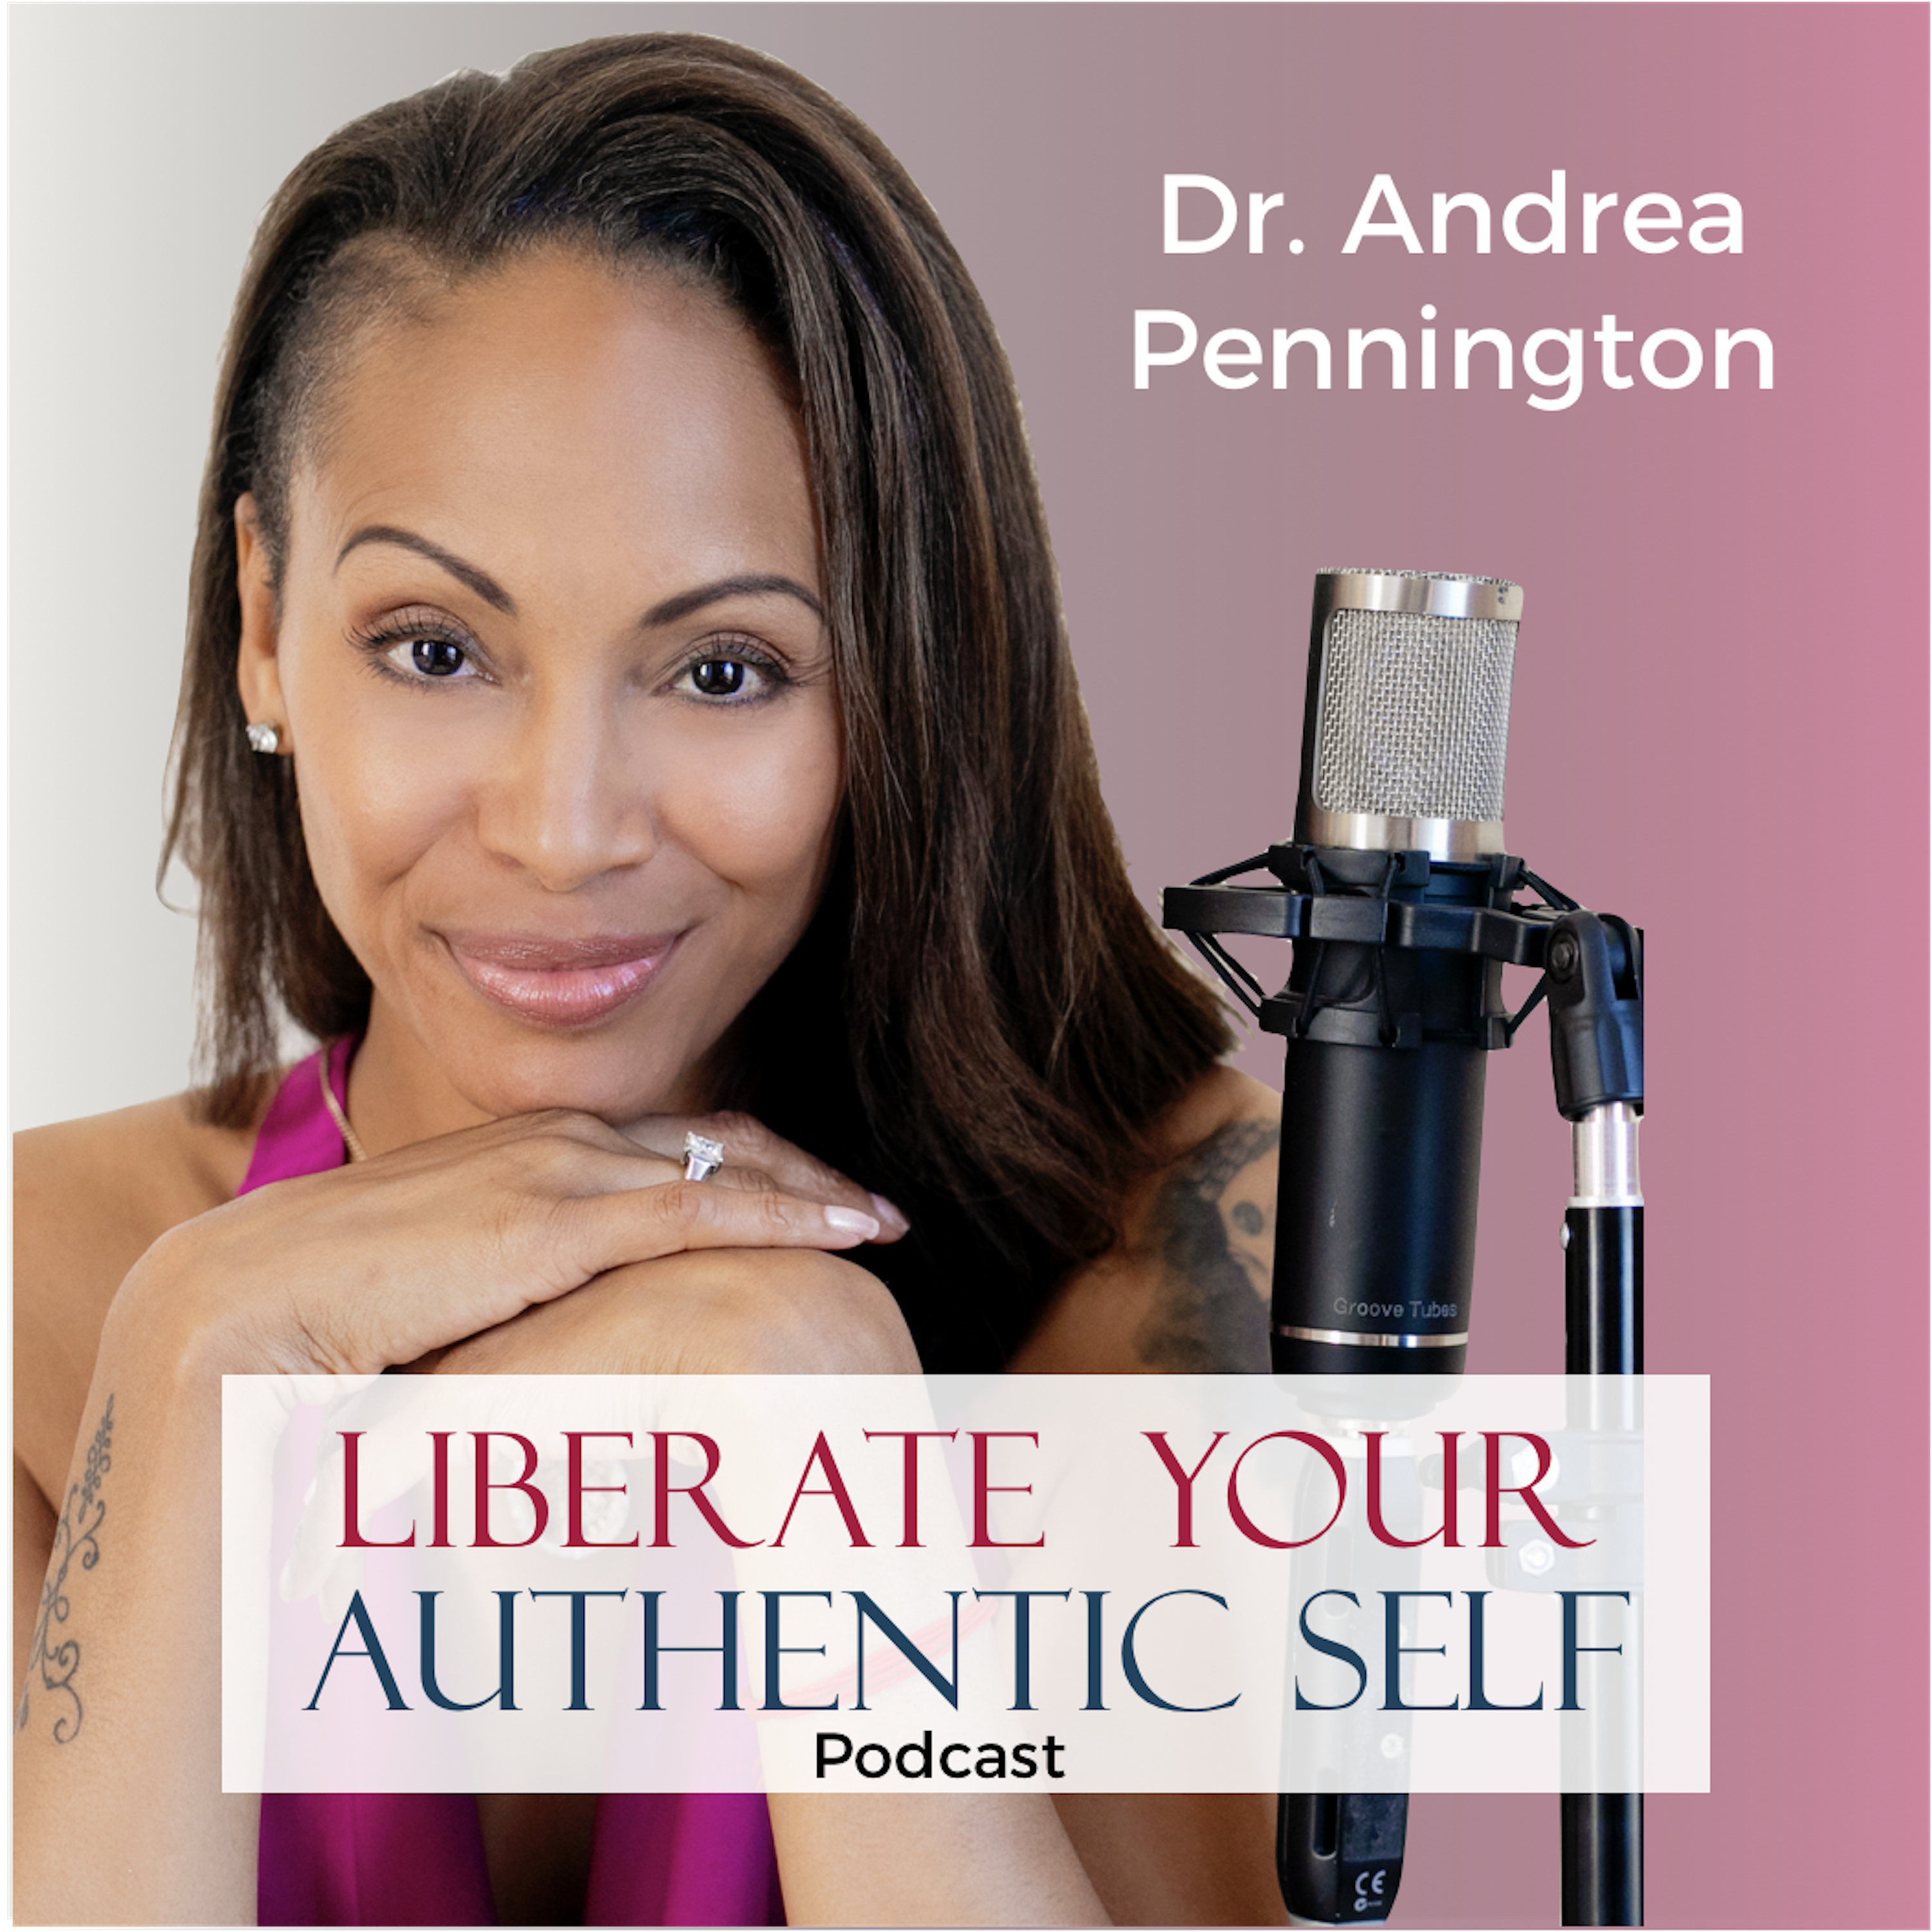 The Soul+Science+Psychology of Optimal Wellbeing by Dr Andrea Pennington